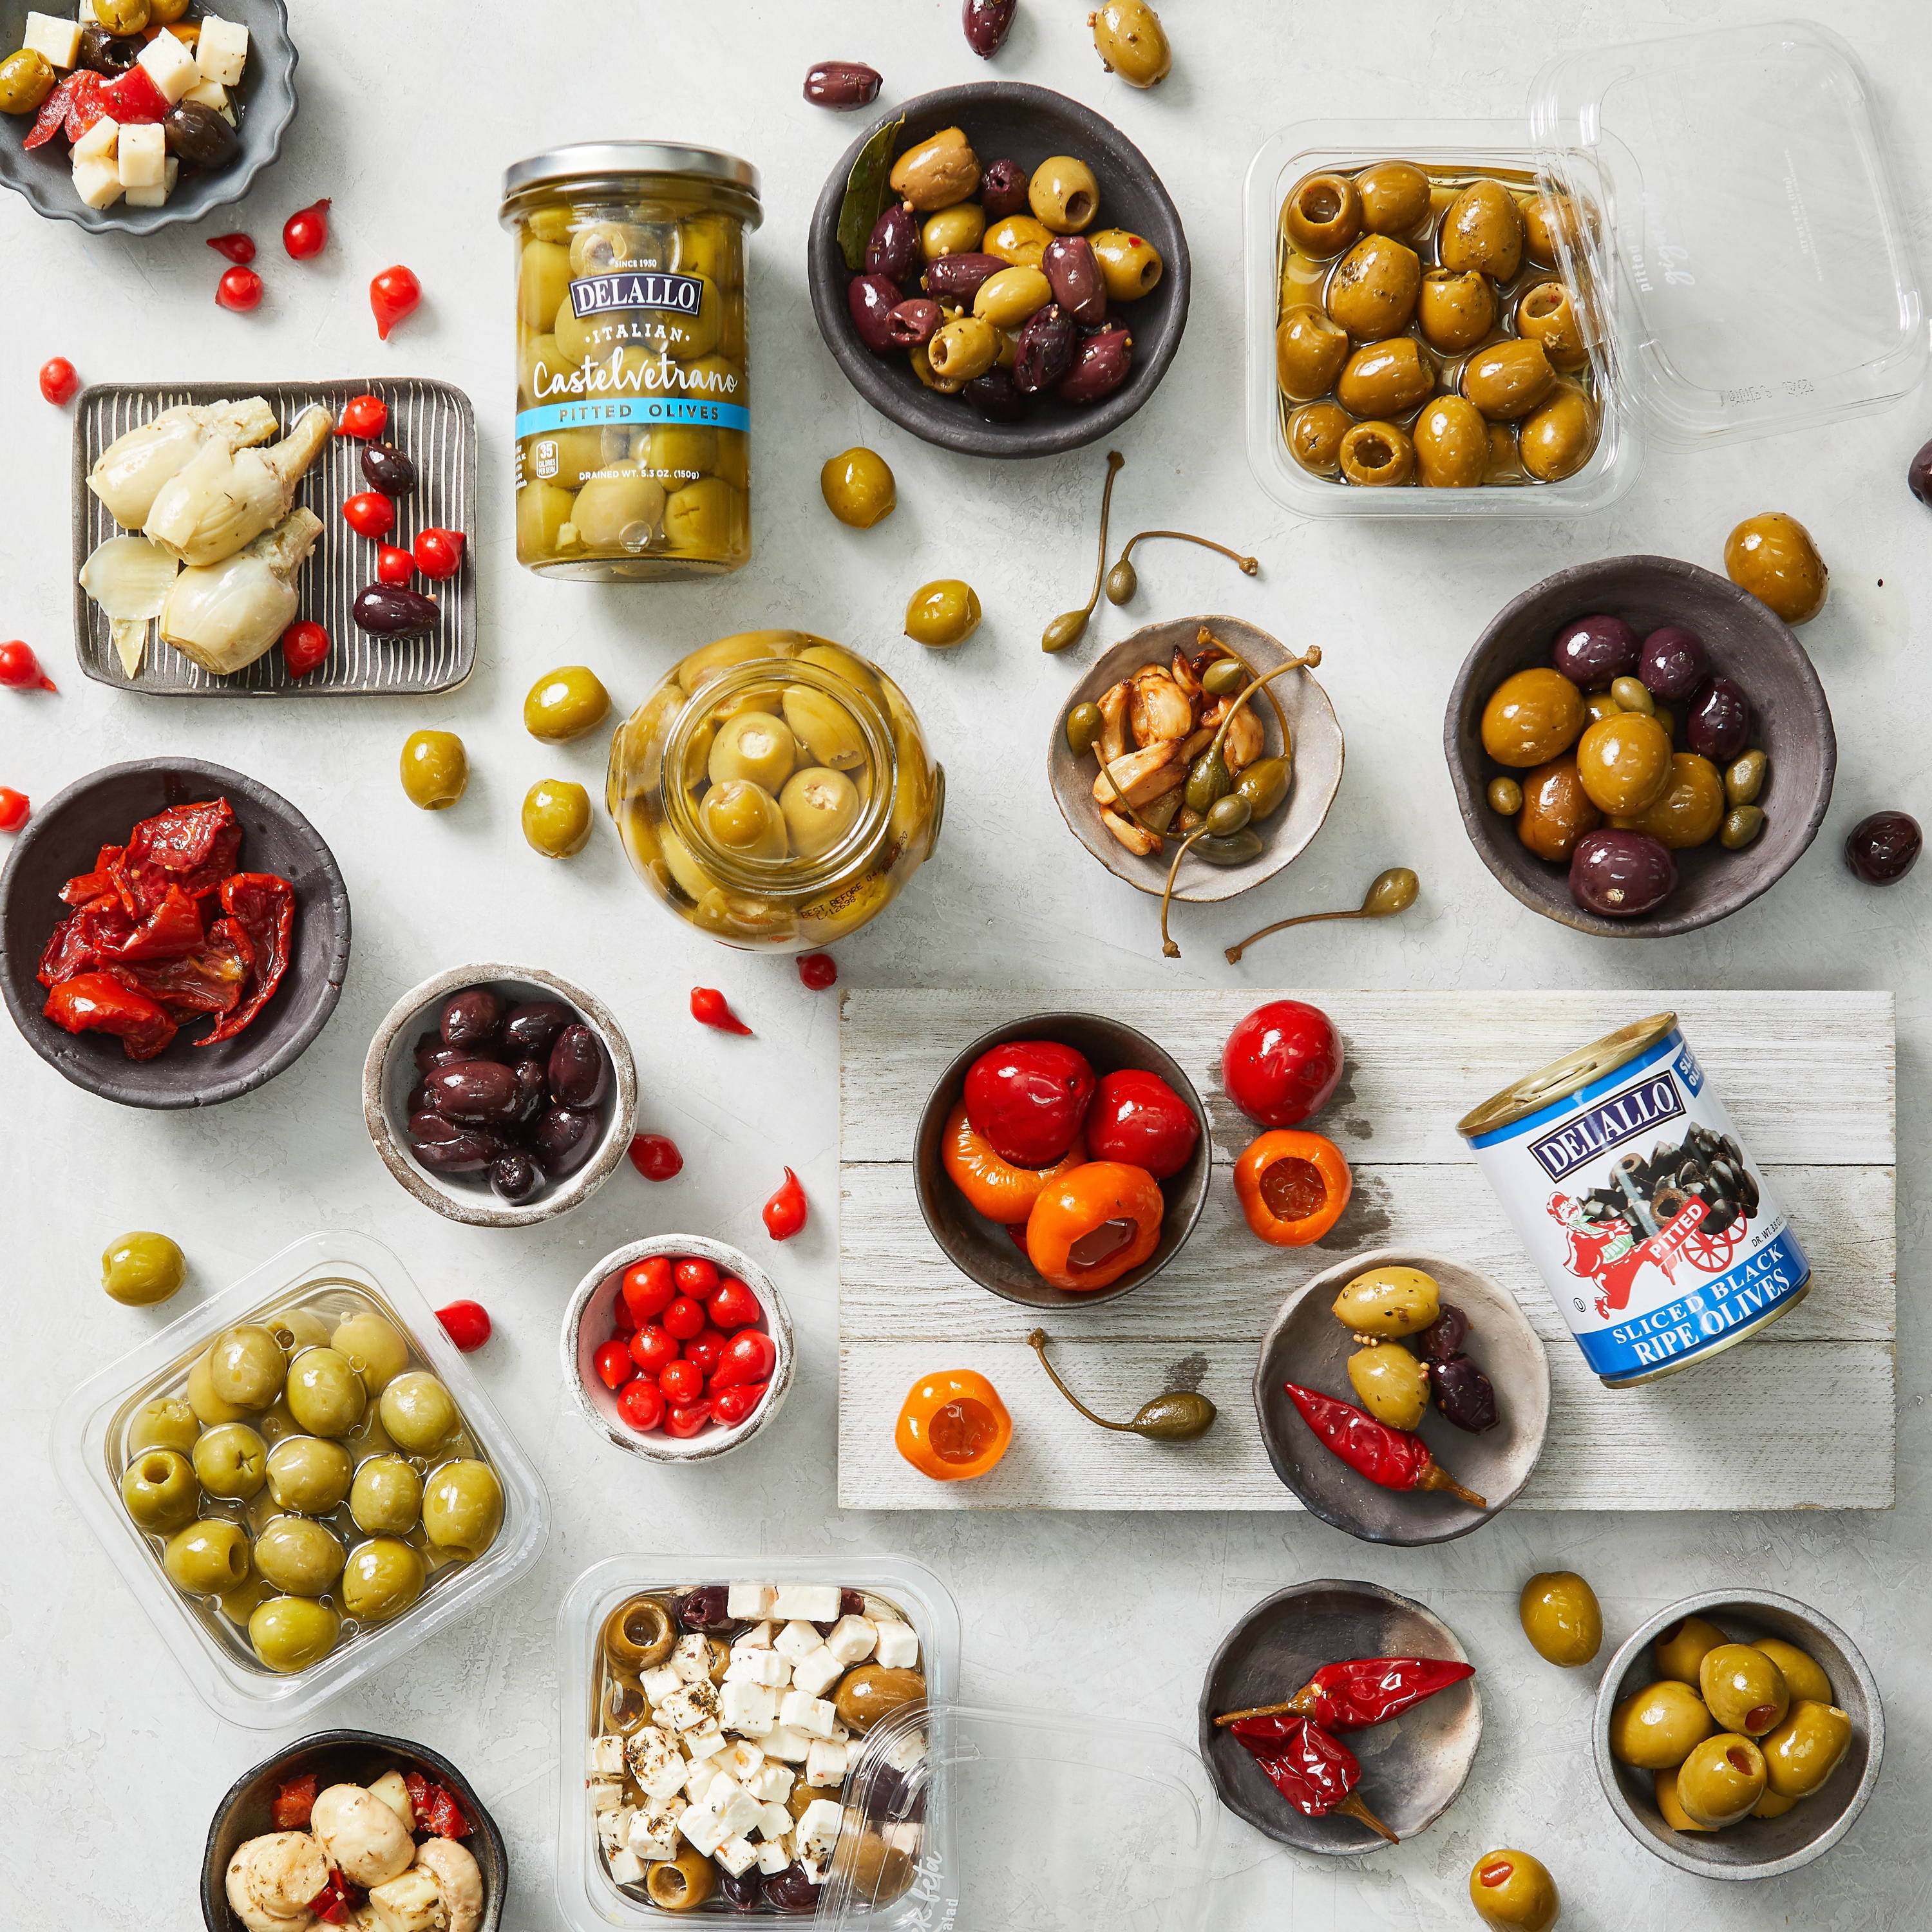 Assorted DeLallo olive and antipasti items arranged in packaging and bowls